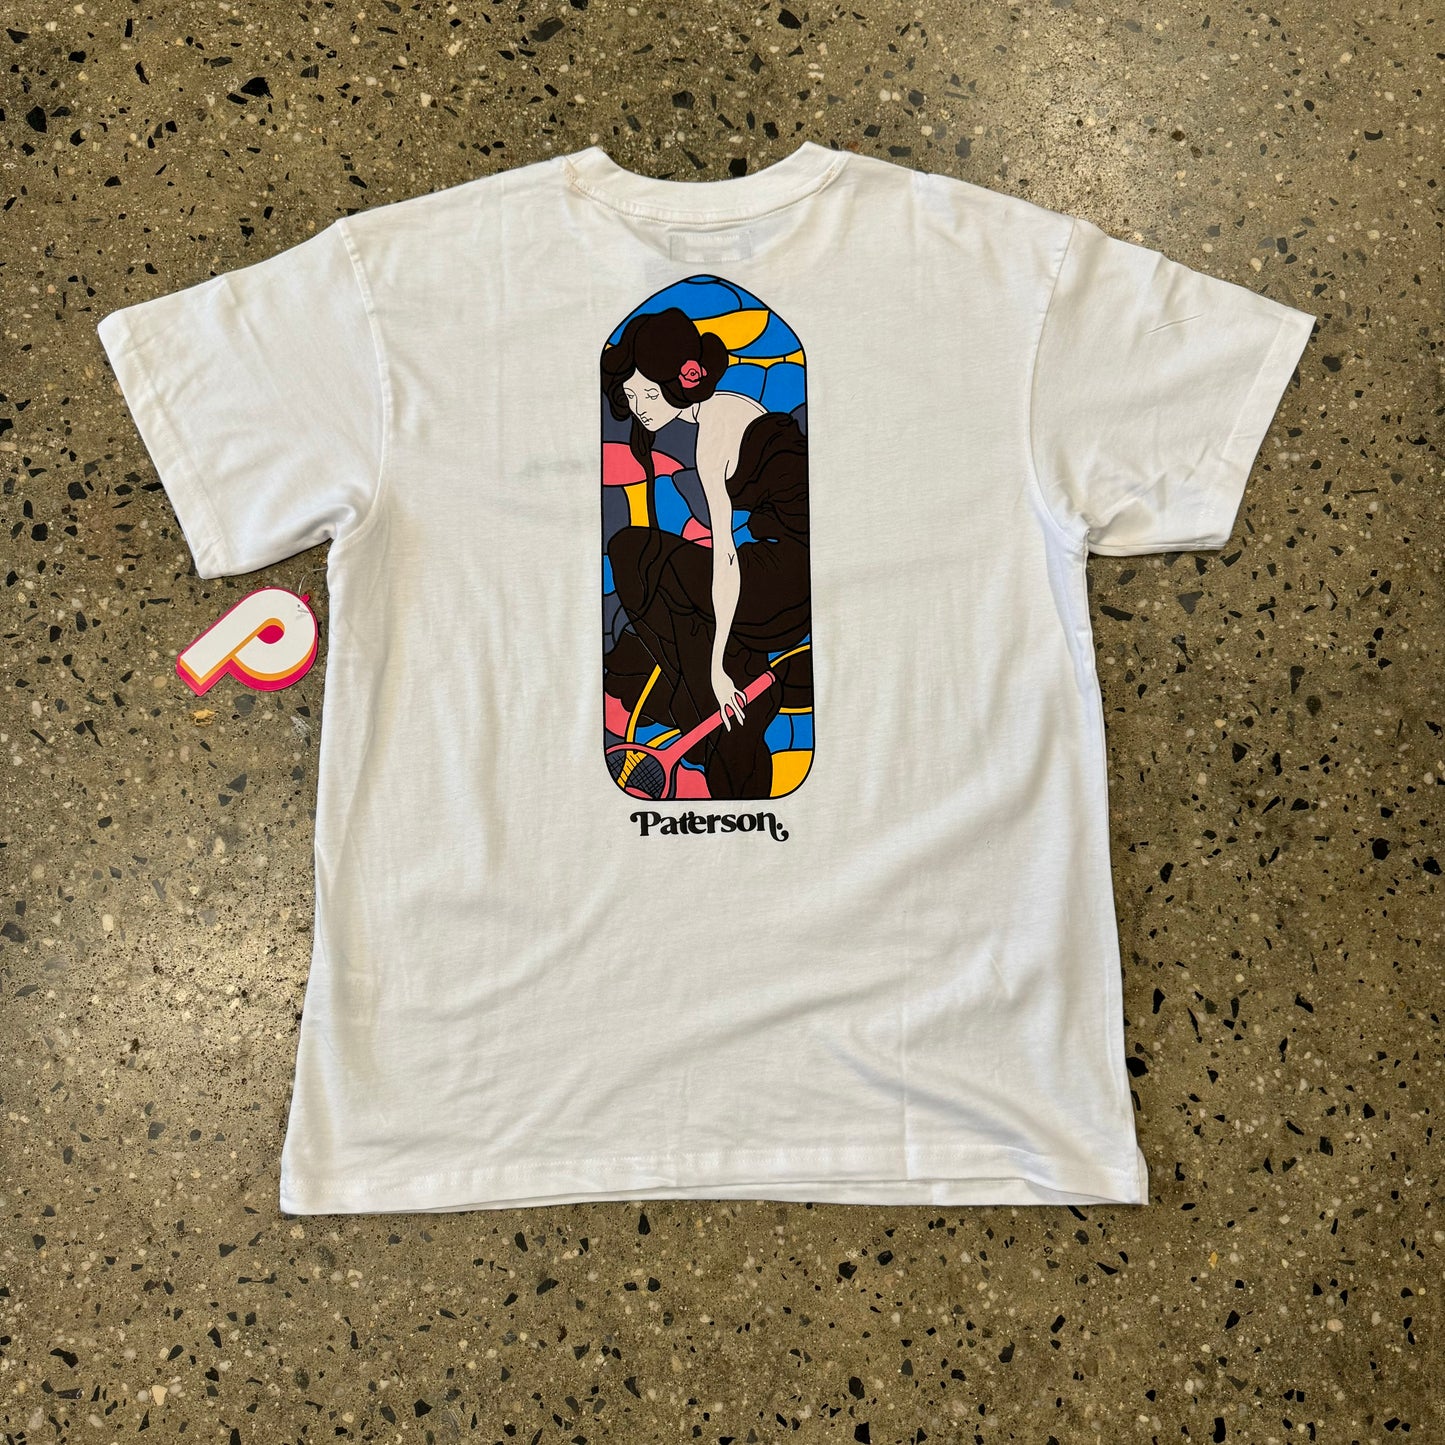 multi color lady with tennis racket on white T-shirt